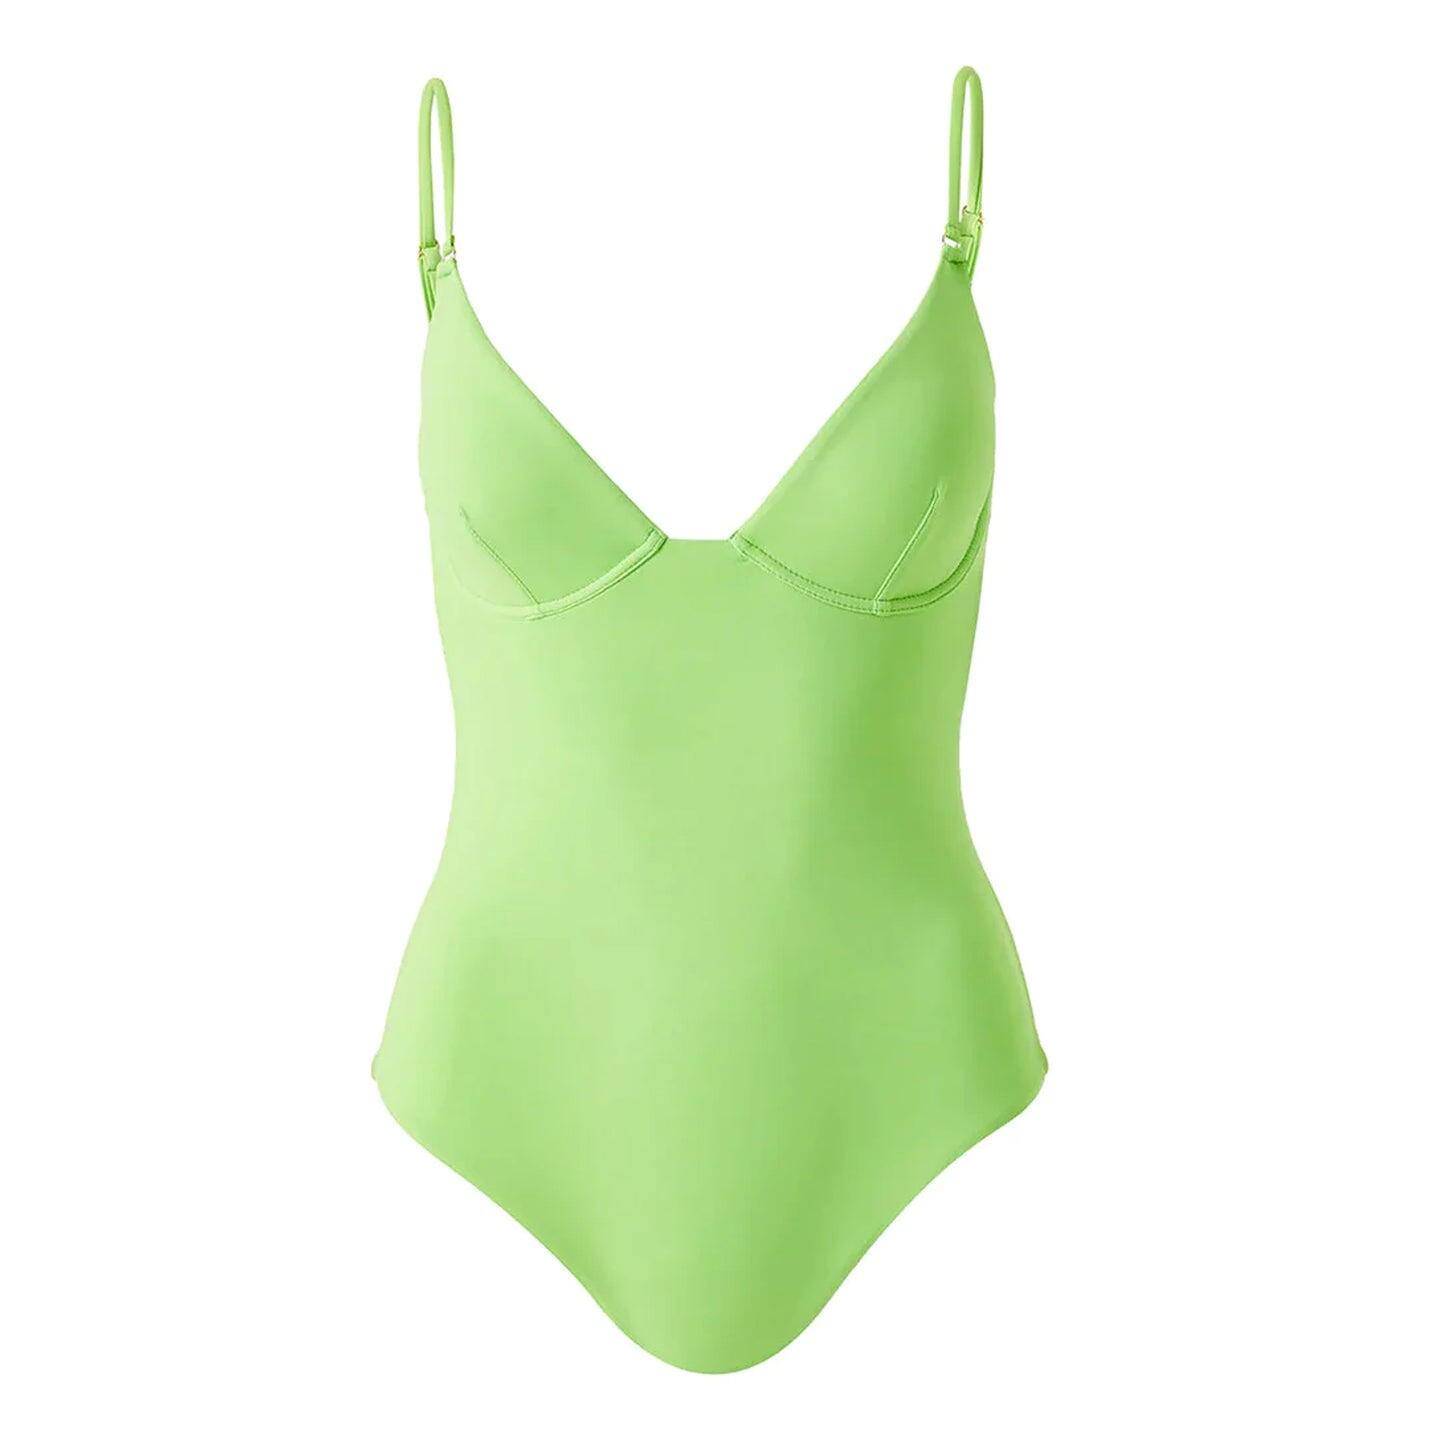 Supportive Swimsuit in Lime Green - Seychelles Lime One Piece